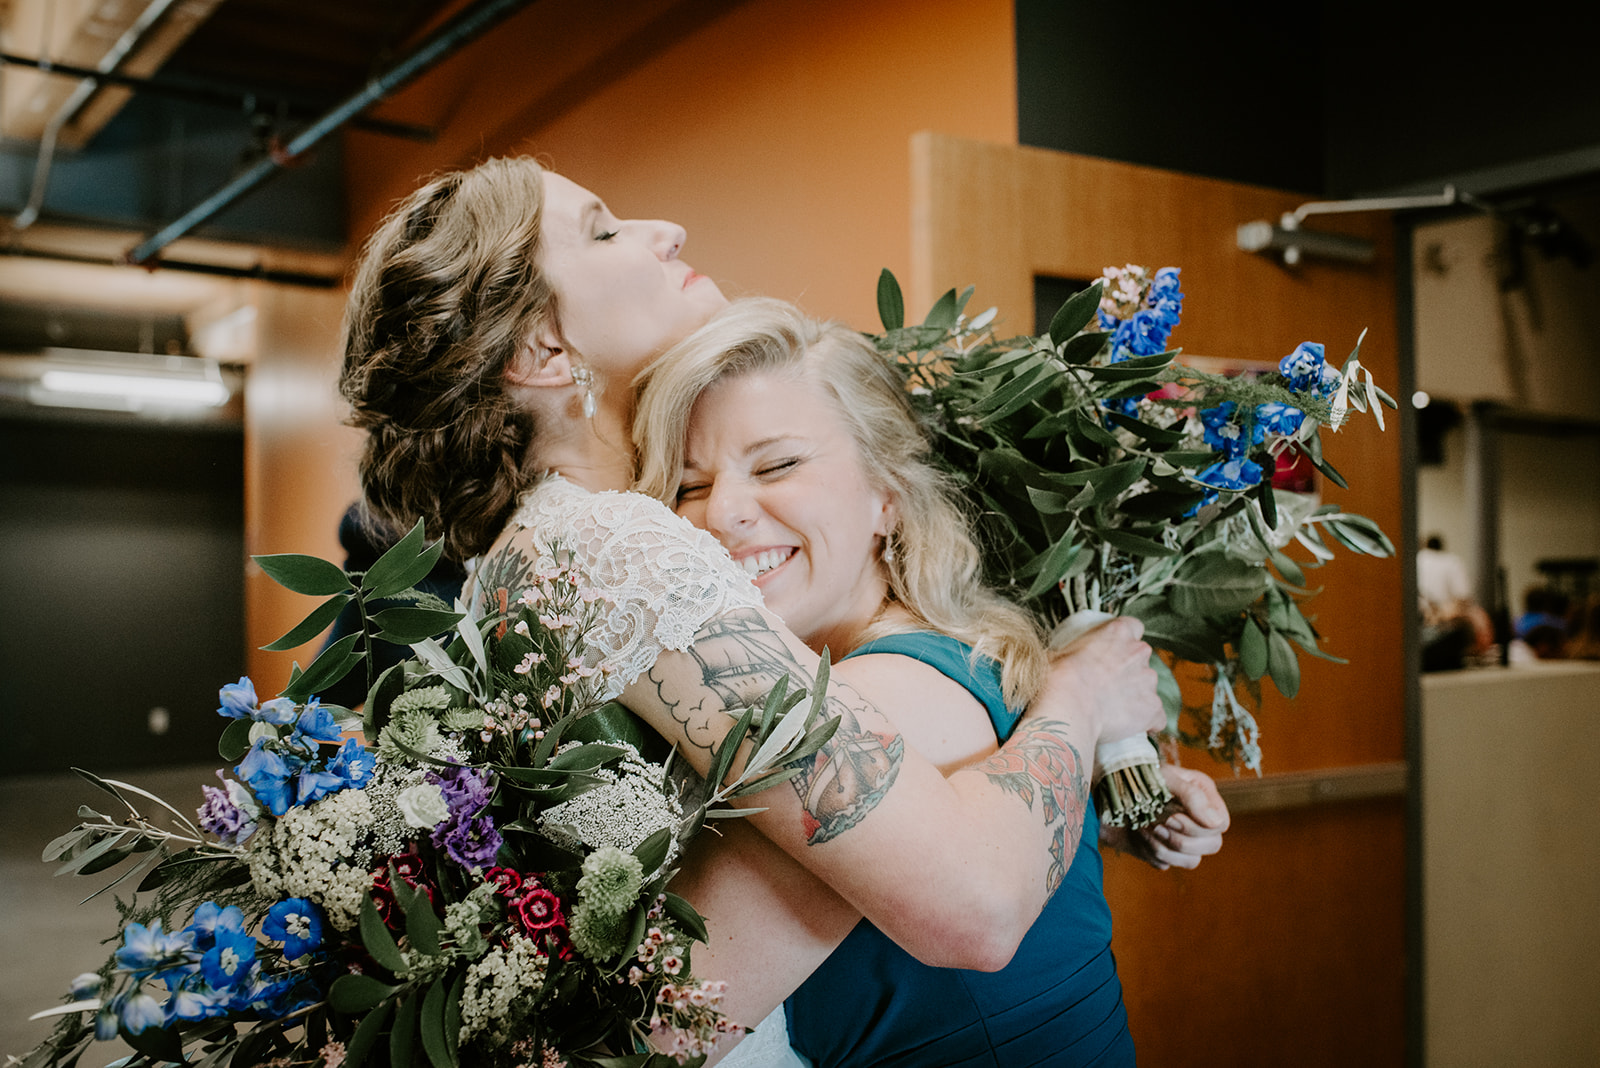 Bride and maid of honor embrace at end of wedding ceremony in Grand Rapids Michigan